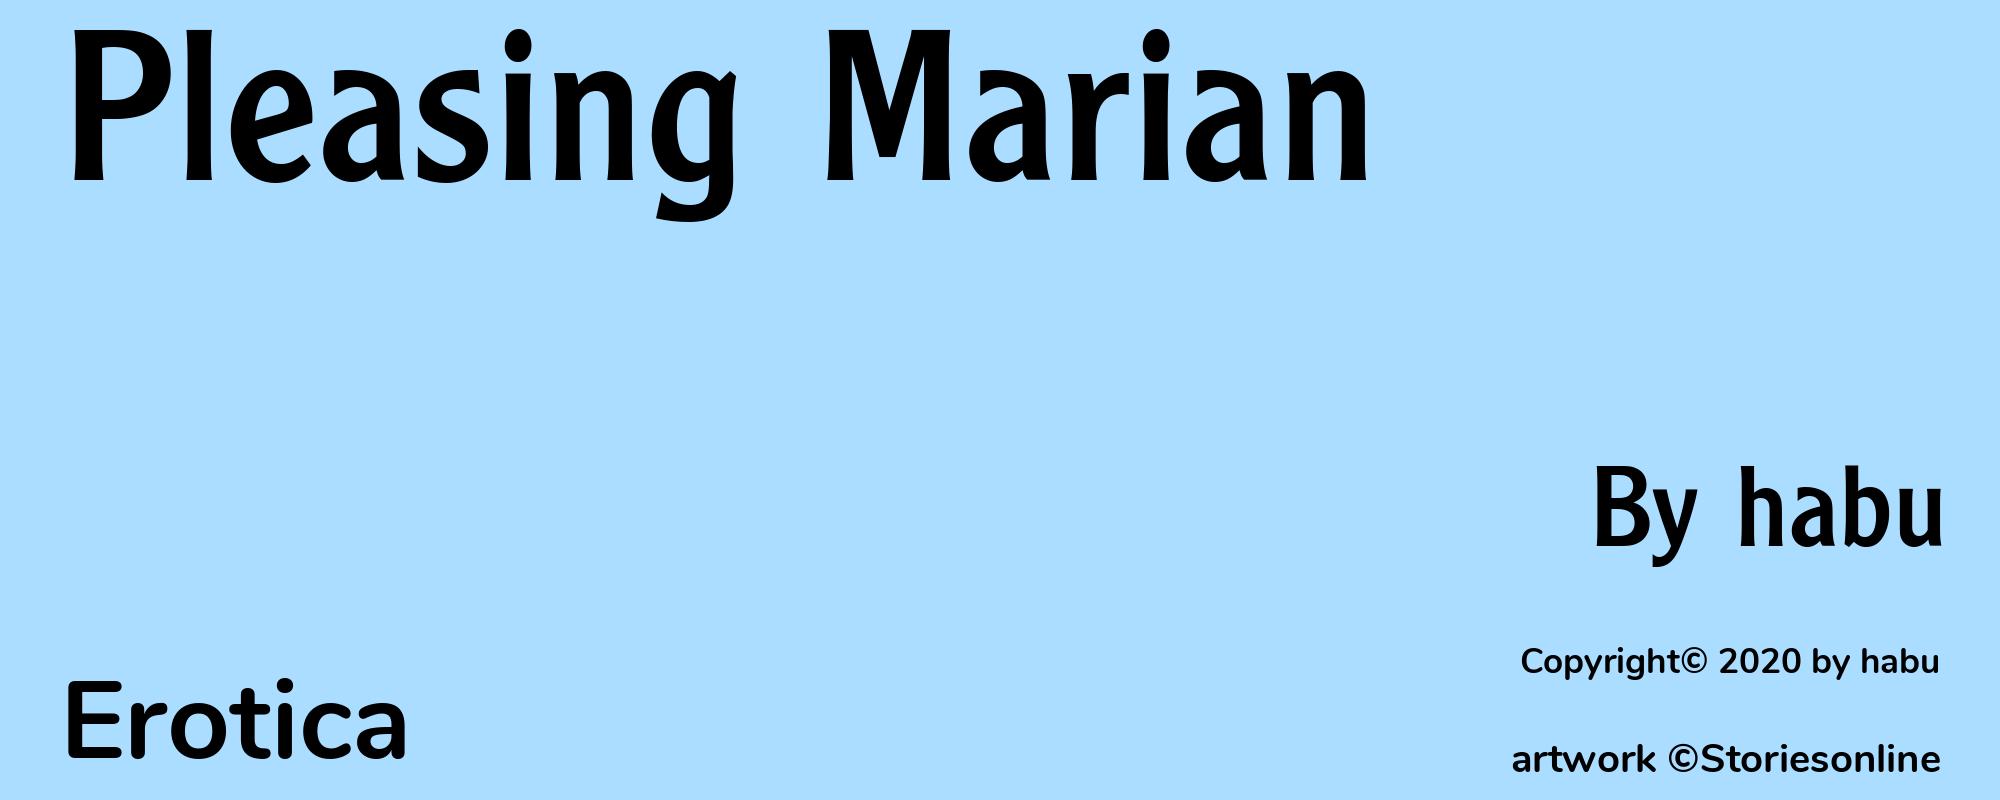 Pleasing Marian - Cover